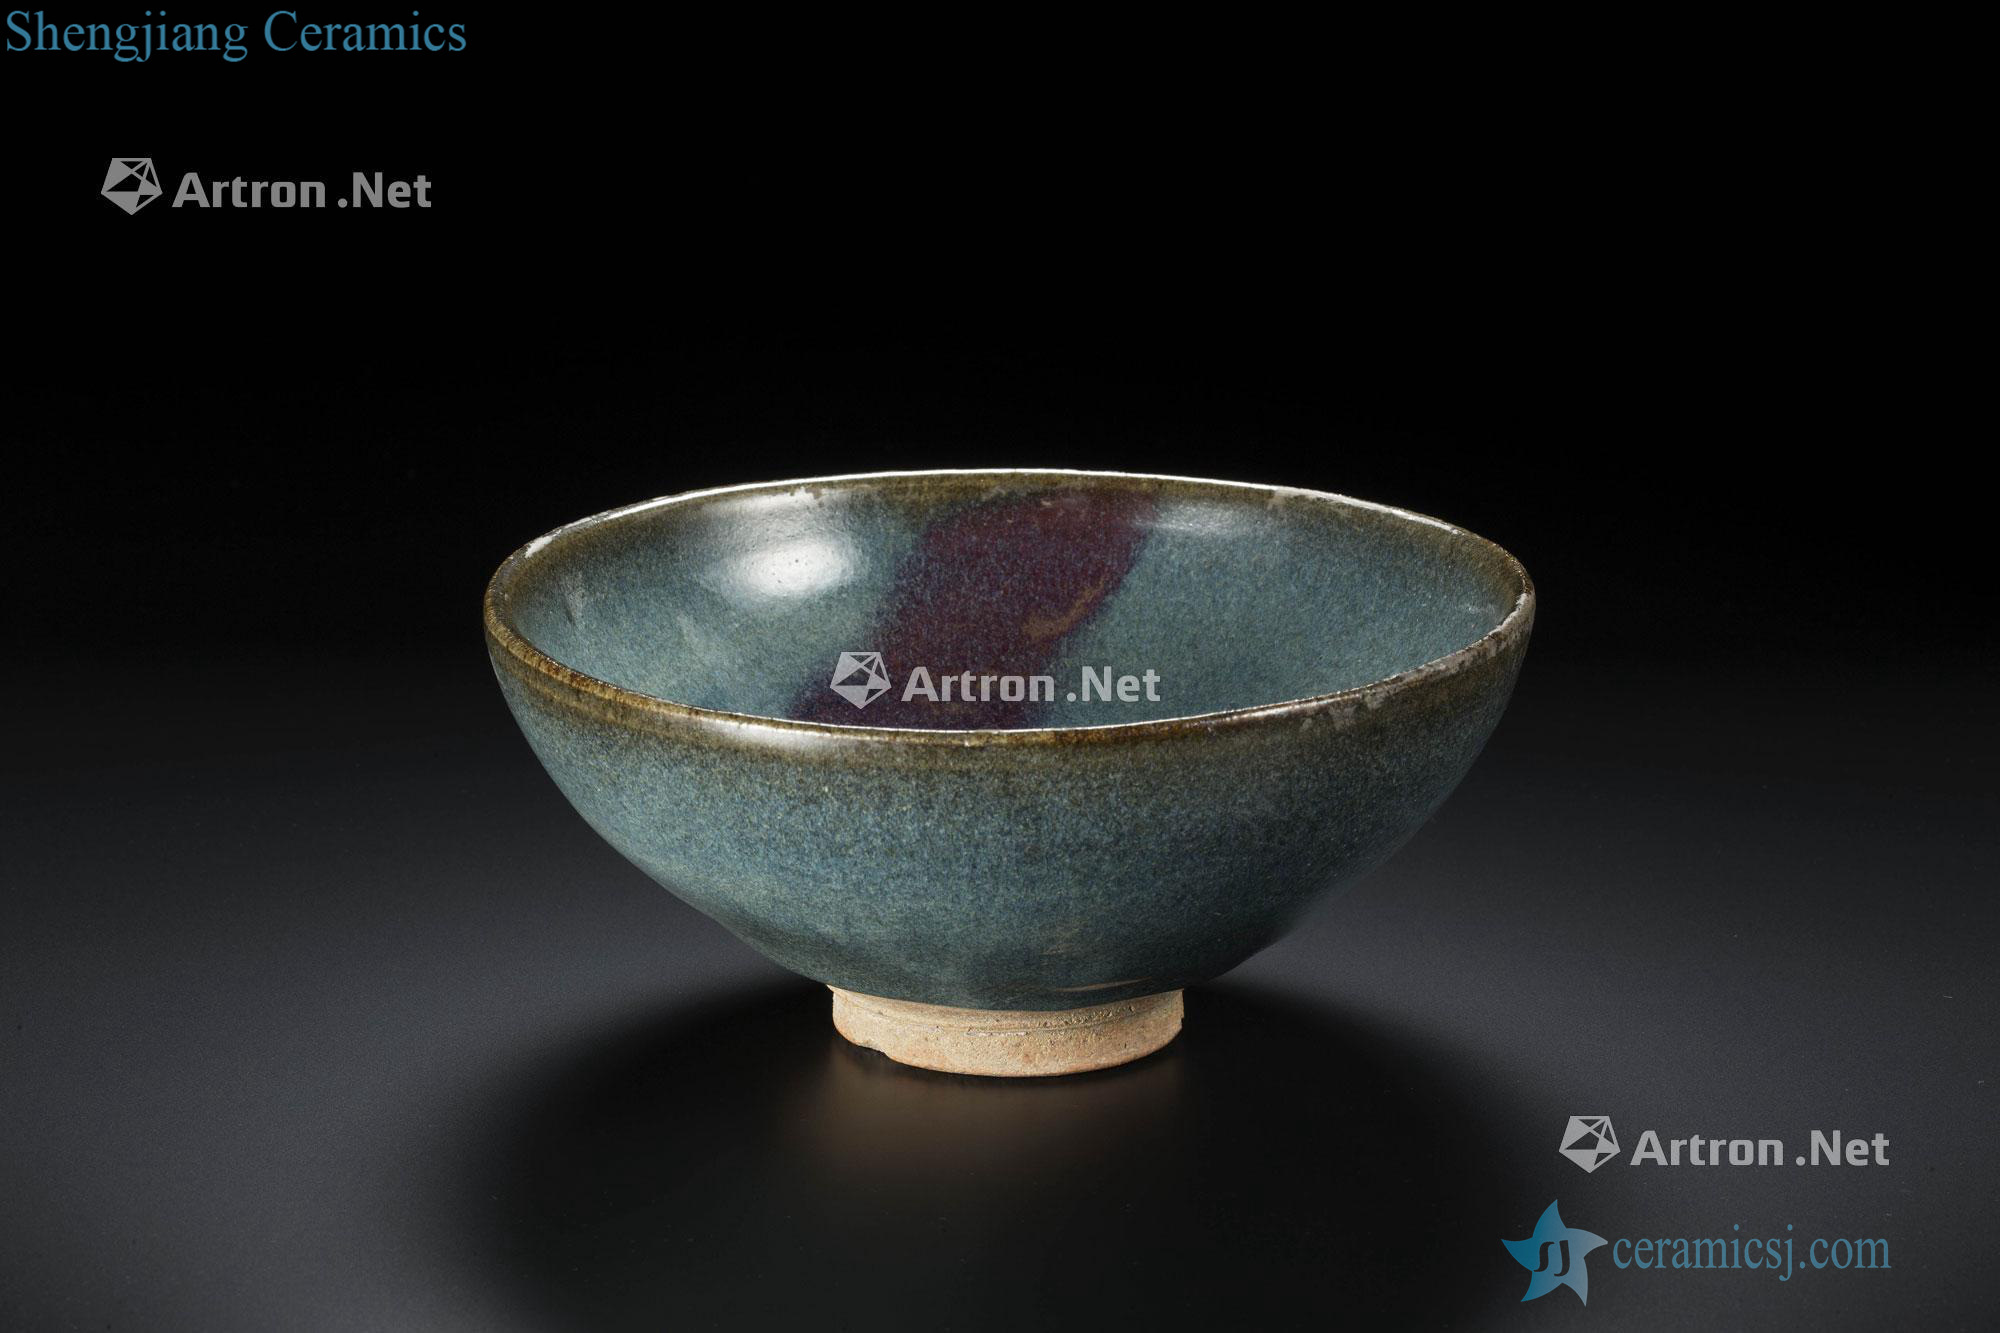 The yuan bowl masterpieces